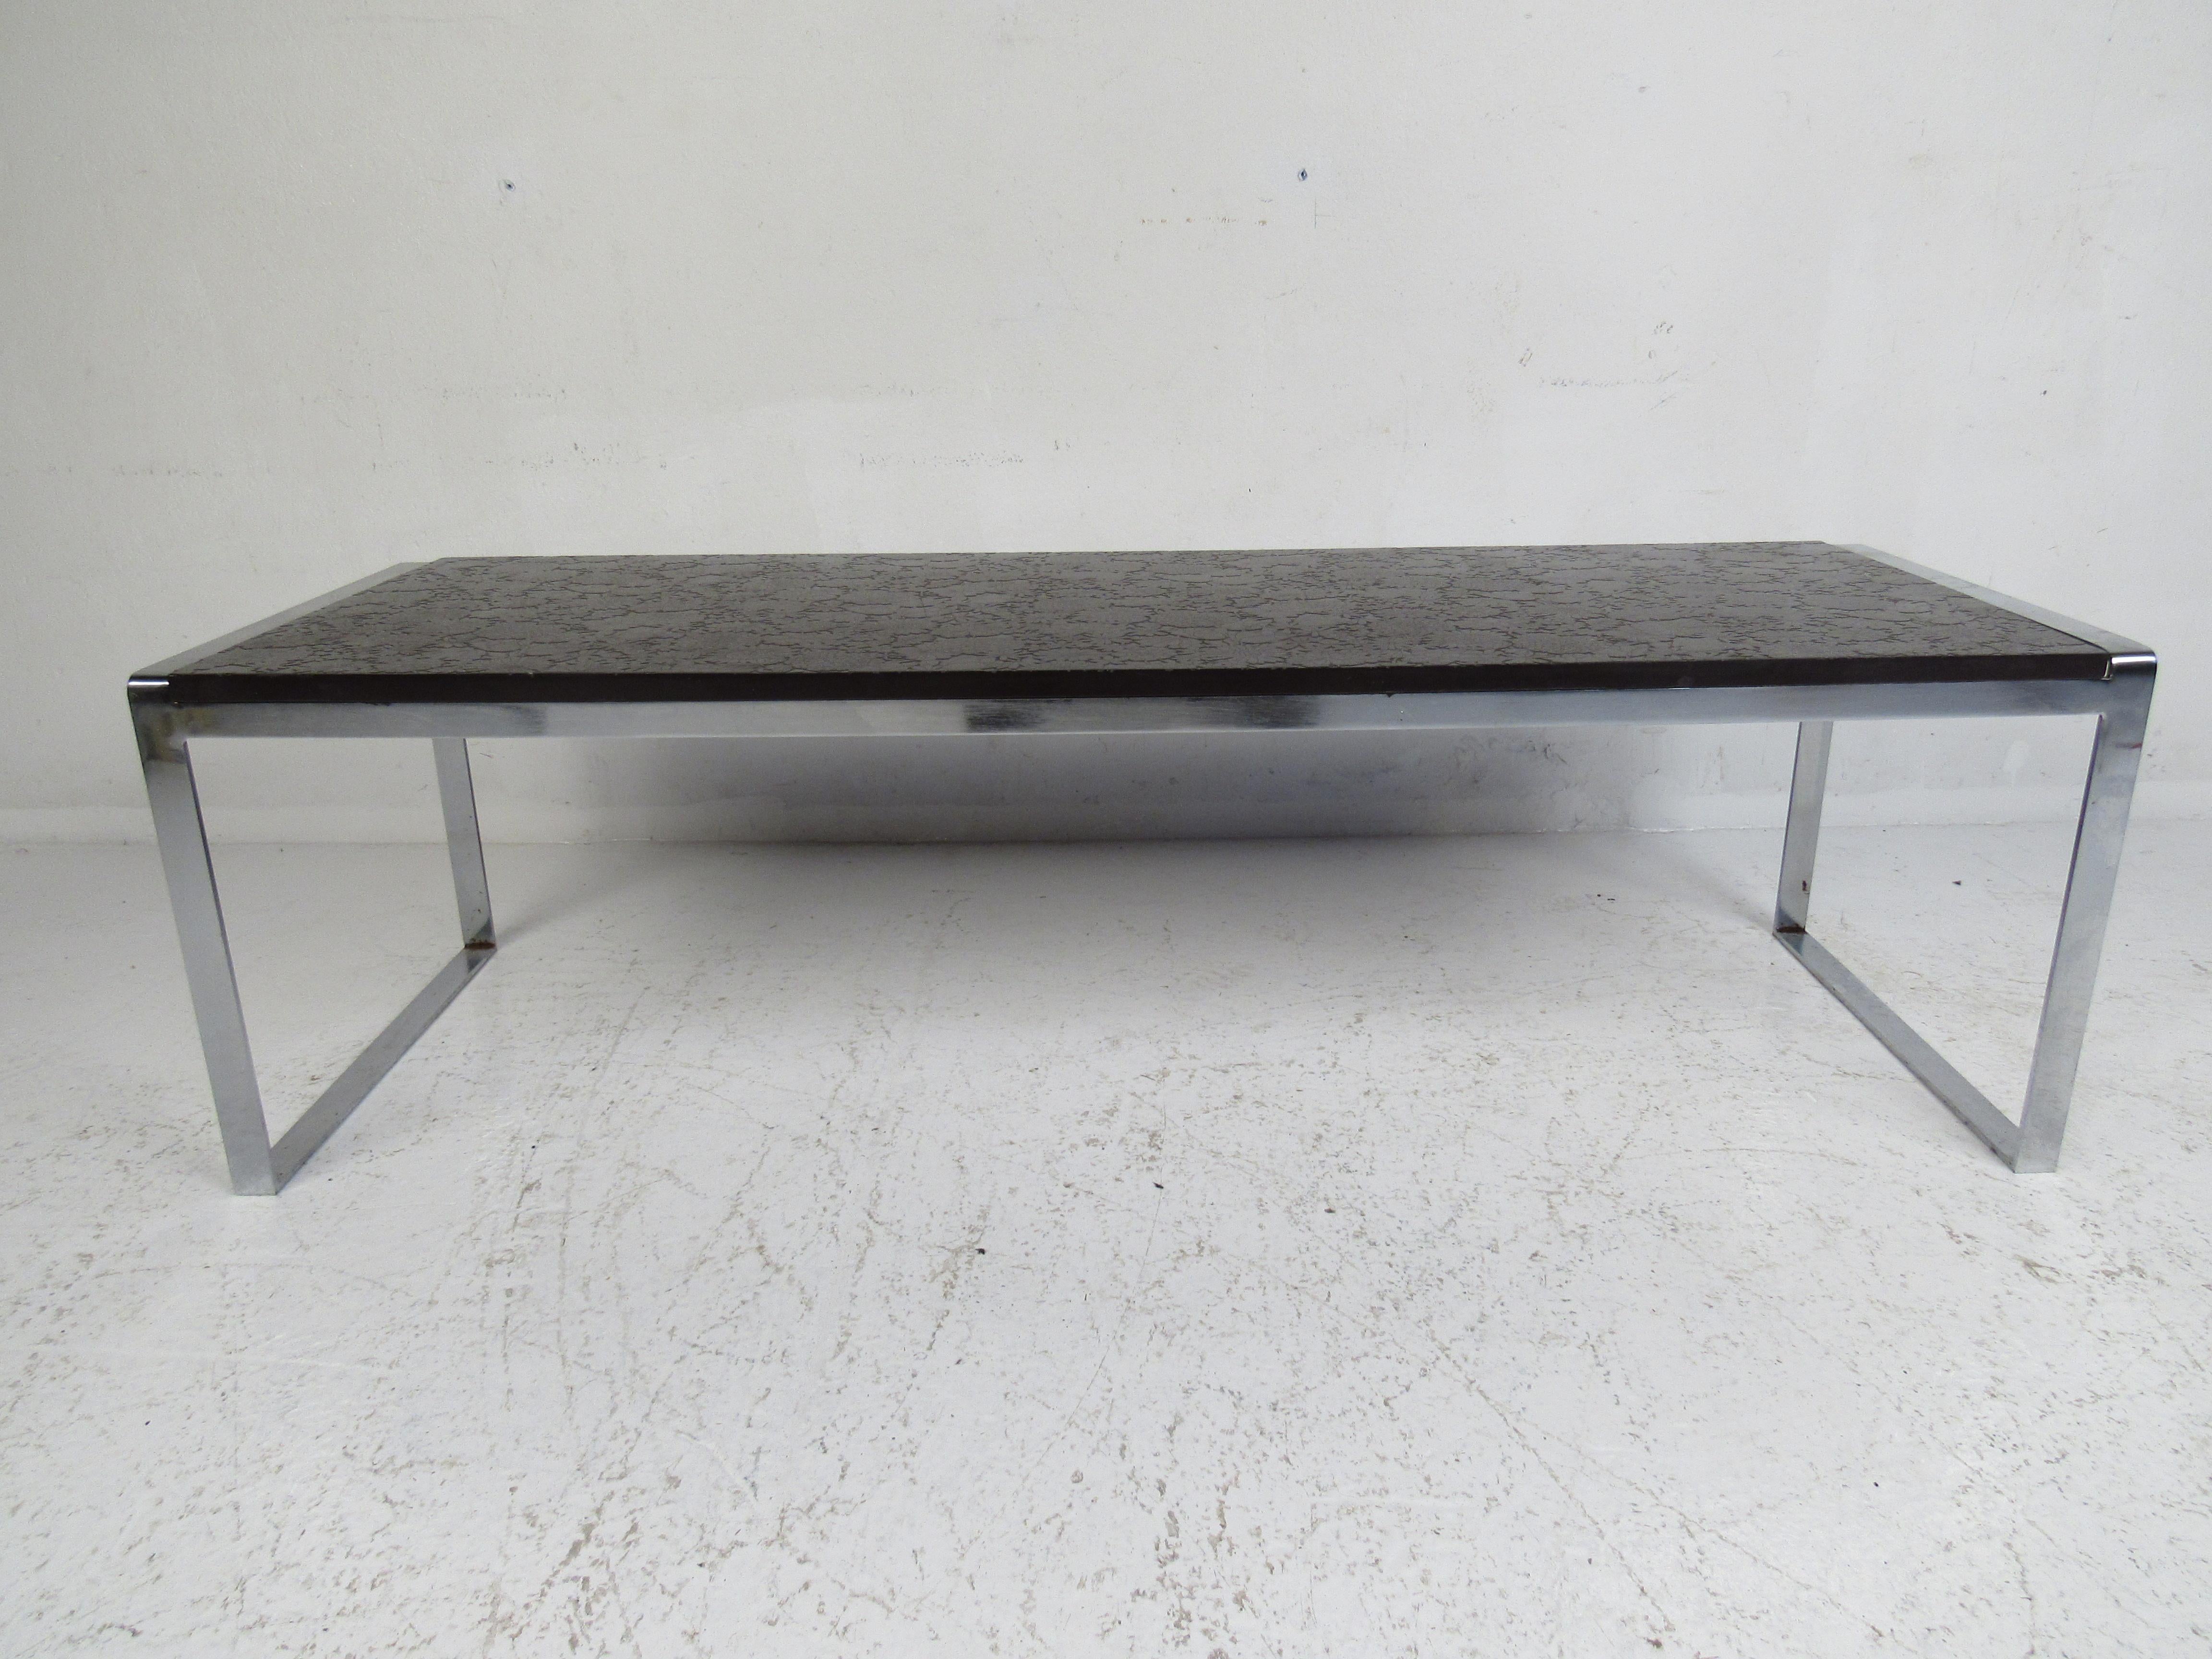 This beautiful vintage modern coffee table features a decorative slate top with etched floral designs. A sturdy and stylish flat bar chrome base adds to the midcentury appeal. The convenient rectangular design easily fits into any setting. Please